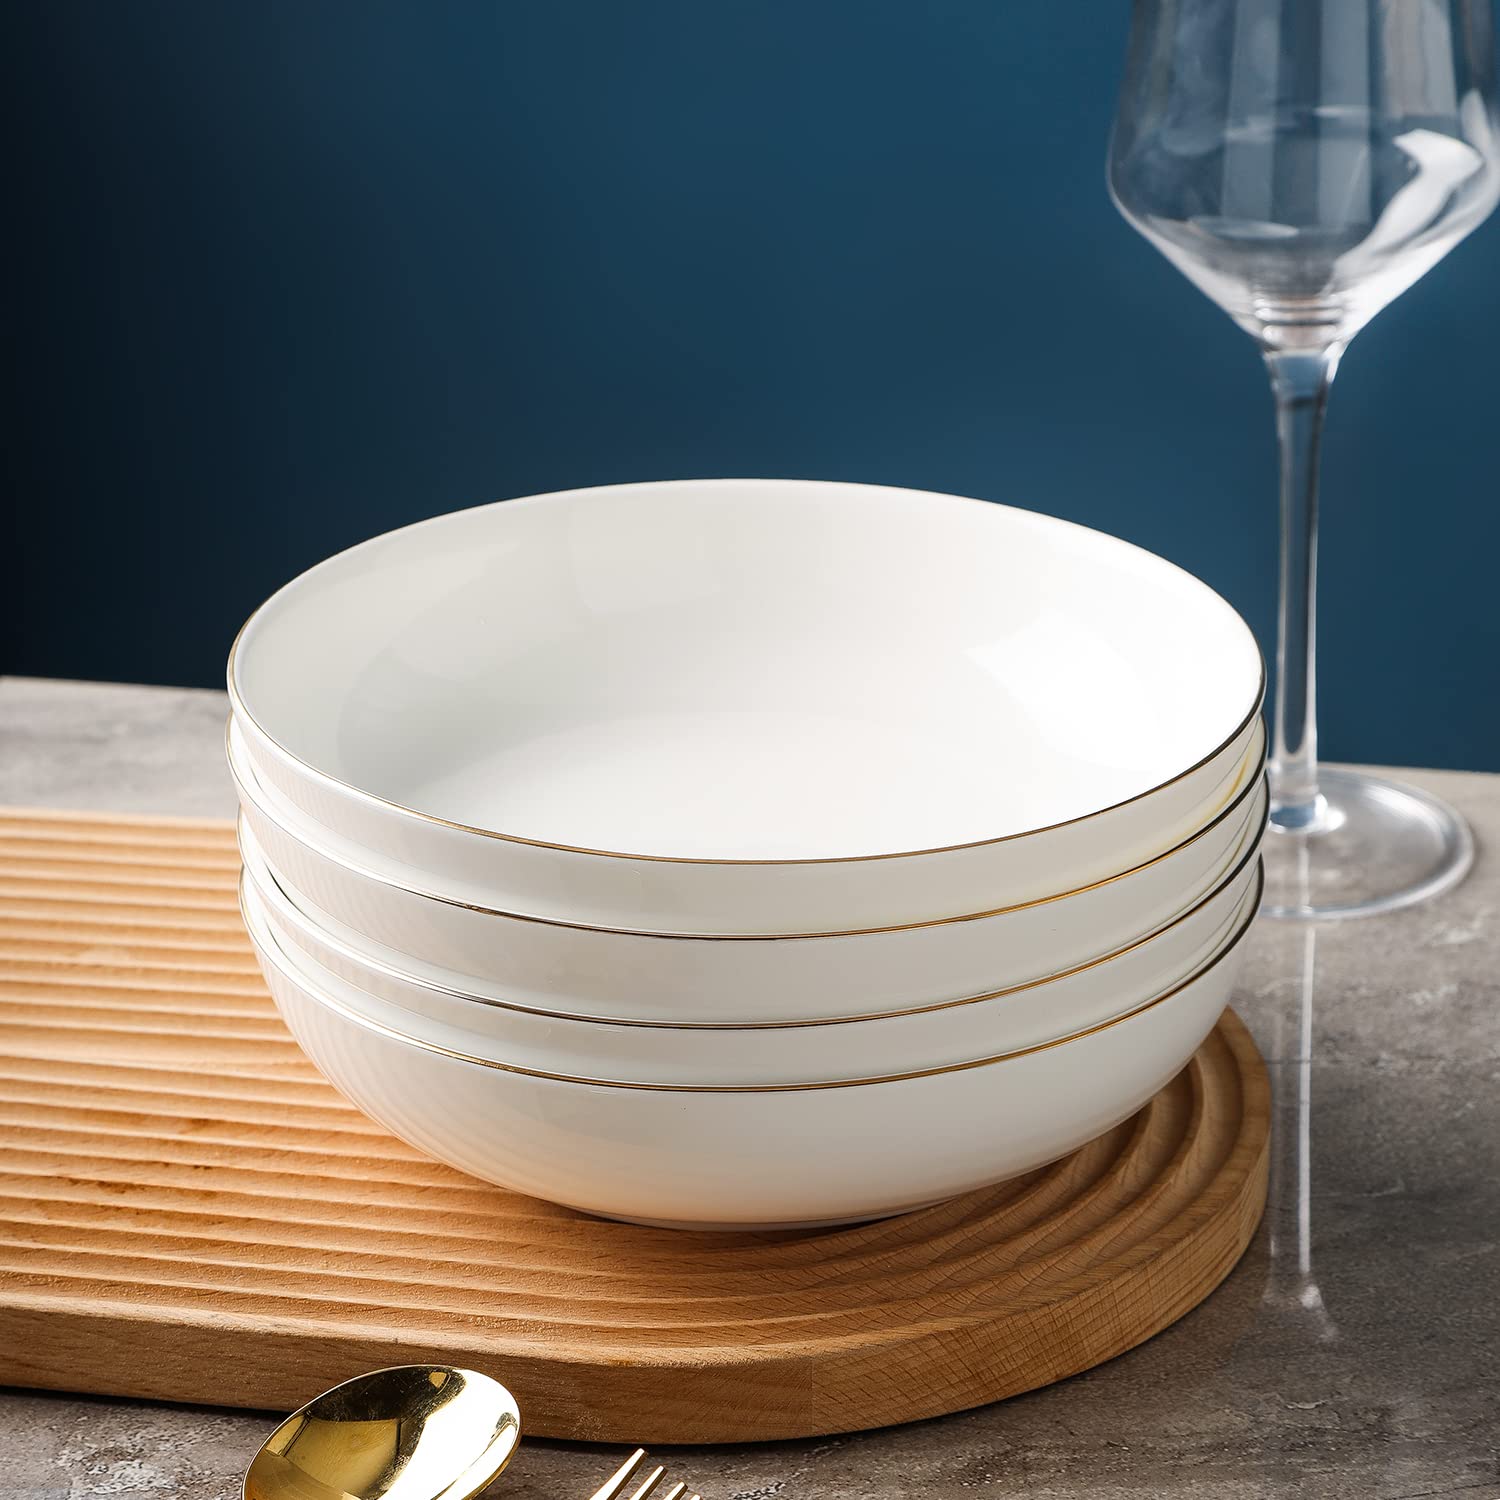 Stone Lain Gabrielle Bone China Dinnerware Set, 12-Piece Service for 4, White and Gold